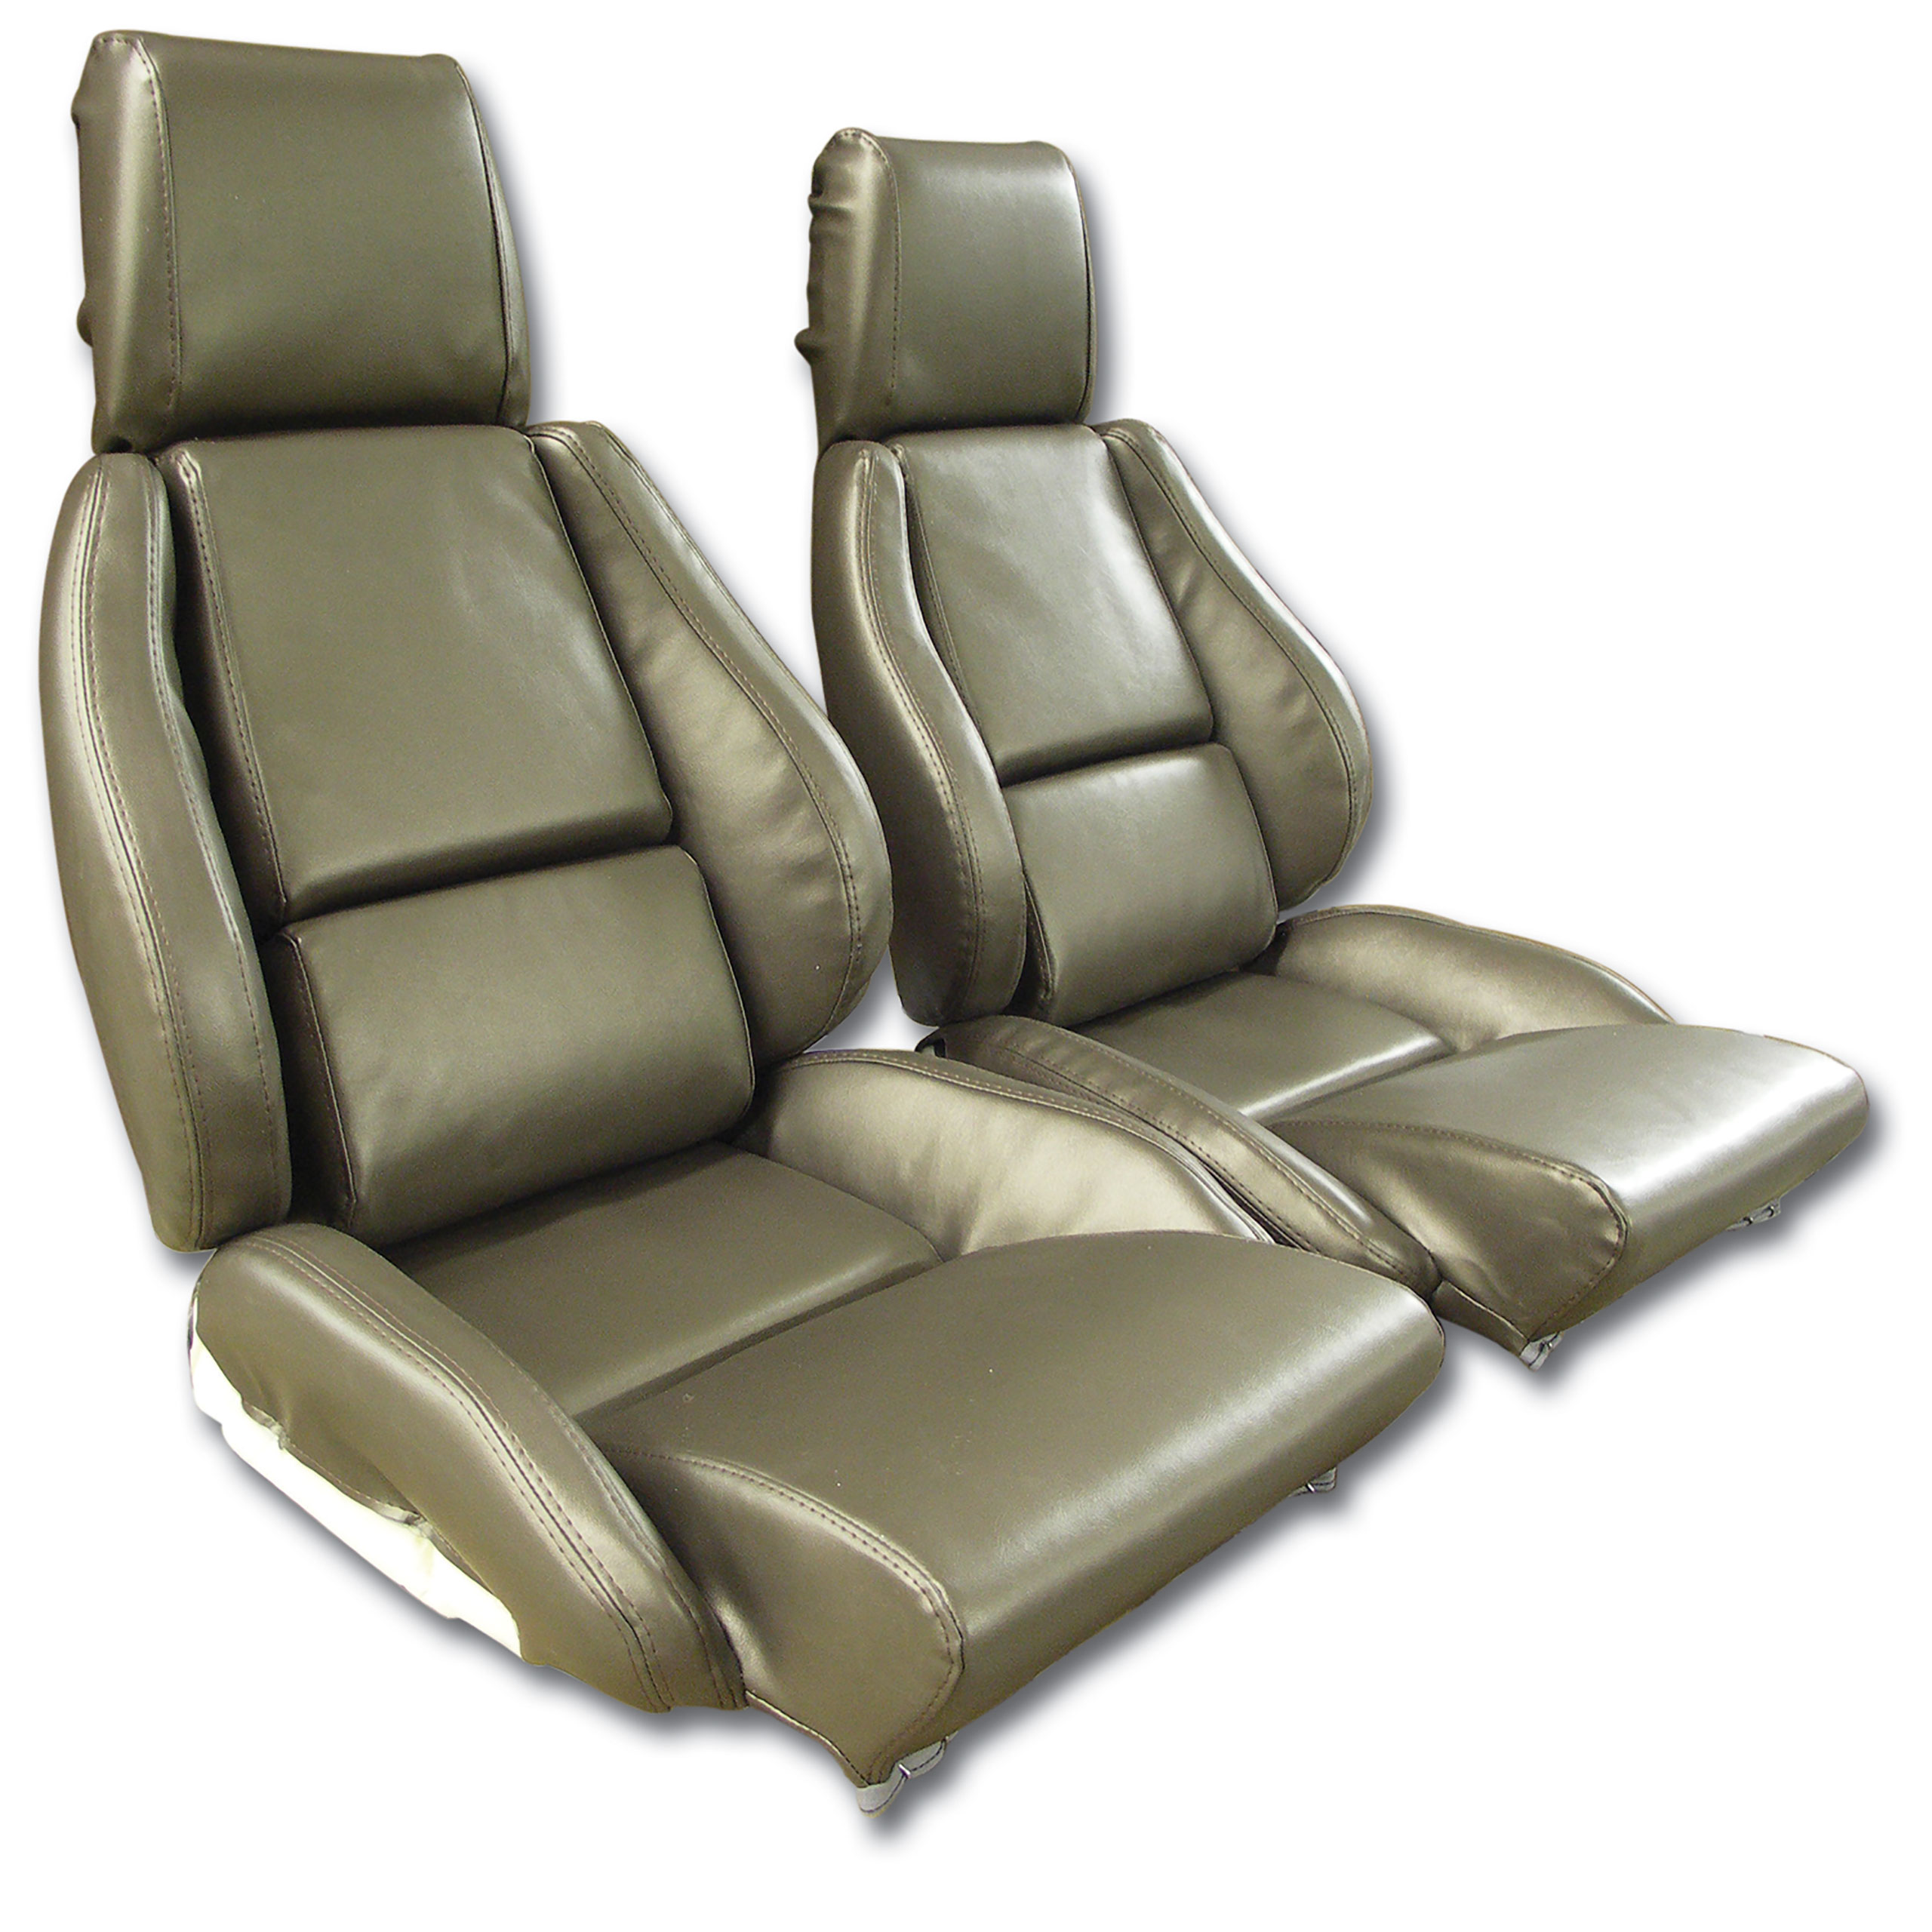 468769 OE Style Leather-Like Standard Seat Covers W/O Perforated Inserts Gray For 84-87 Corvette